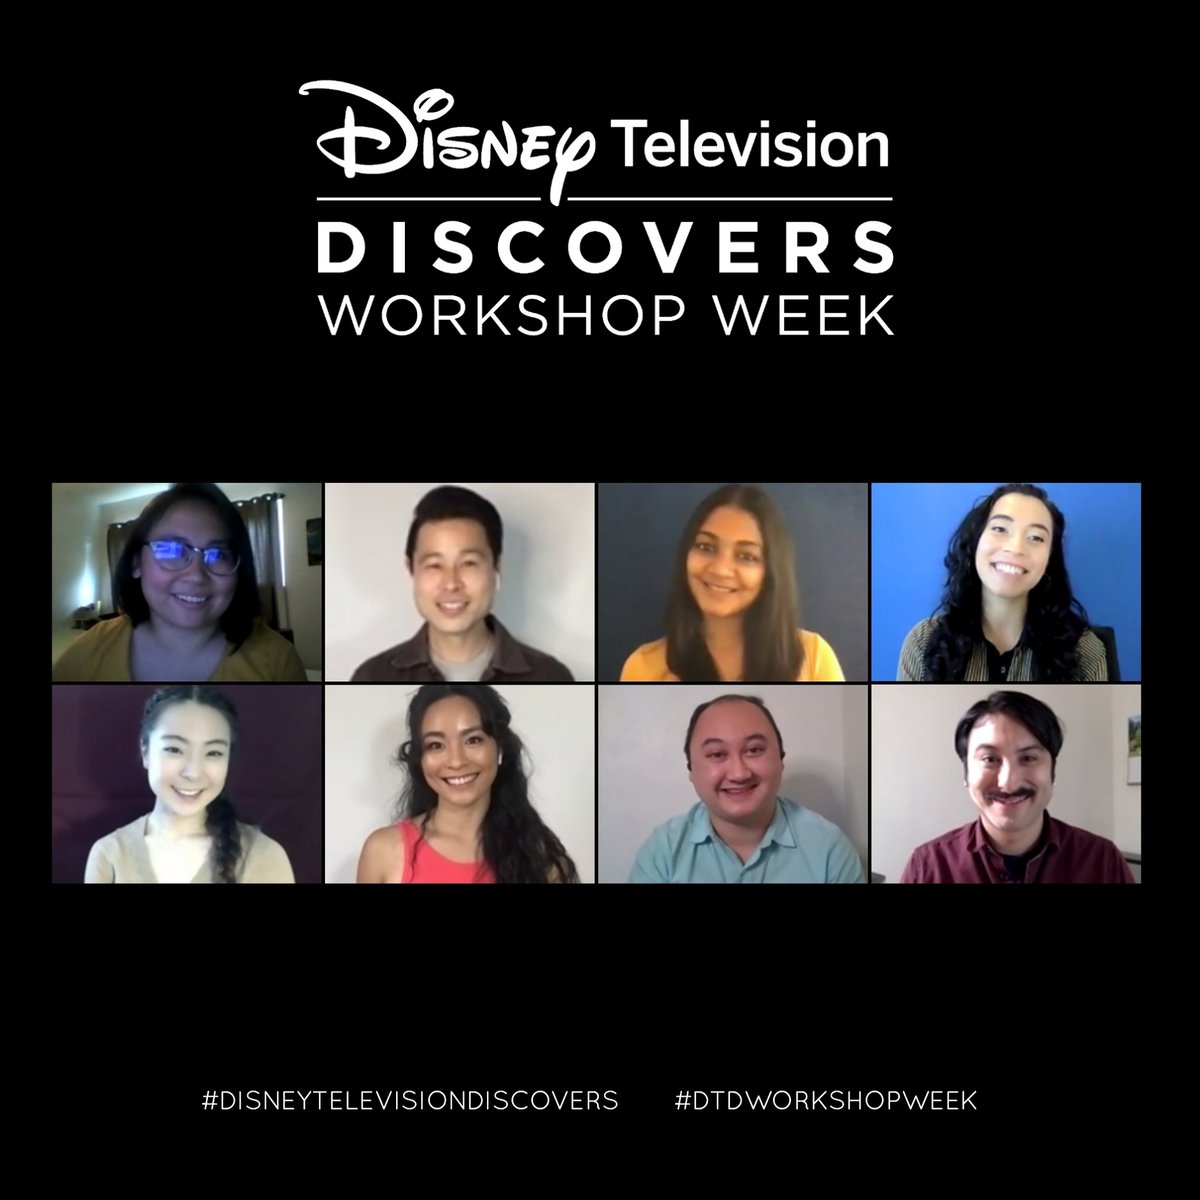 Our 2021 Disney Television Discovers: Workshop Week in Los Angeles continues with actors of East West Players. Thanks for joining remotely! #DisneyTelevisionDiscovers #DTDWorkshopWeek